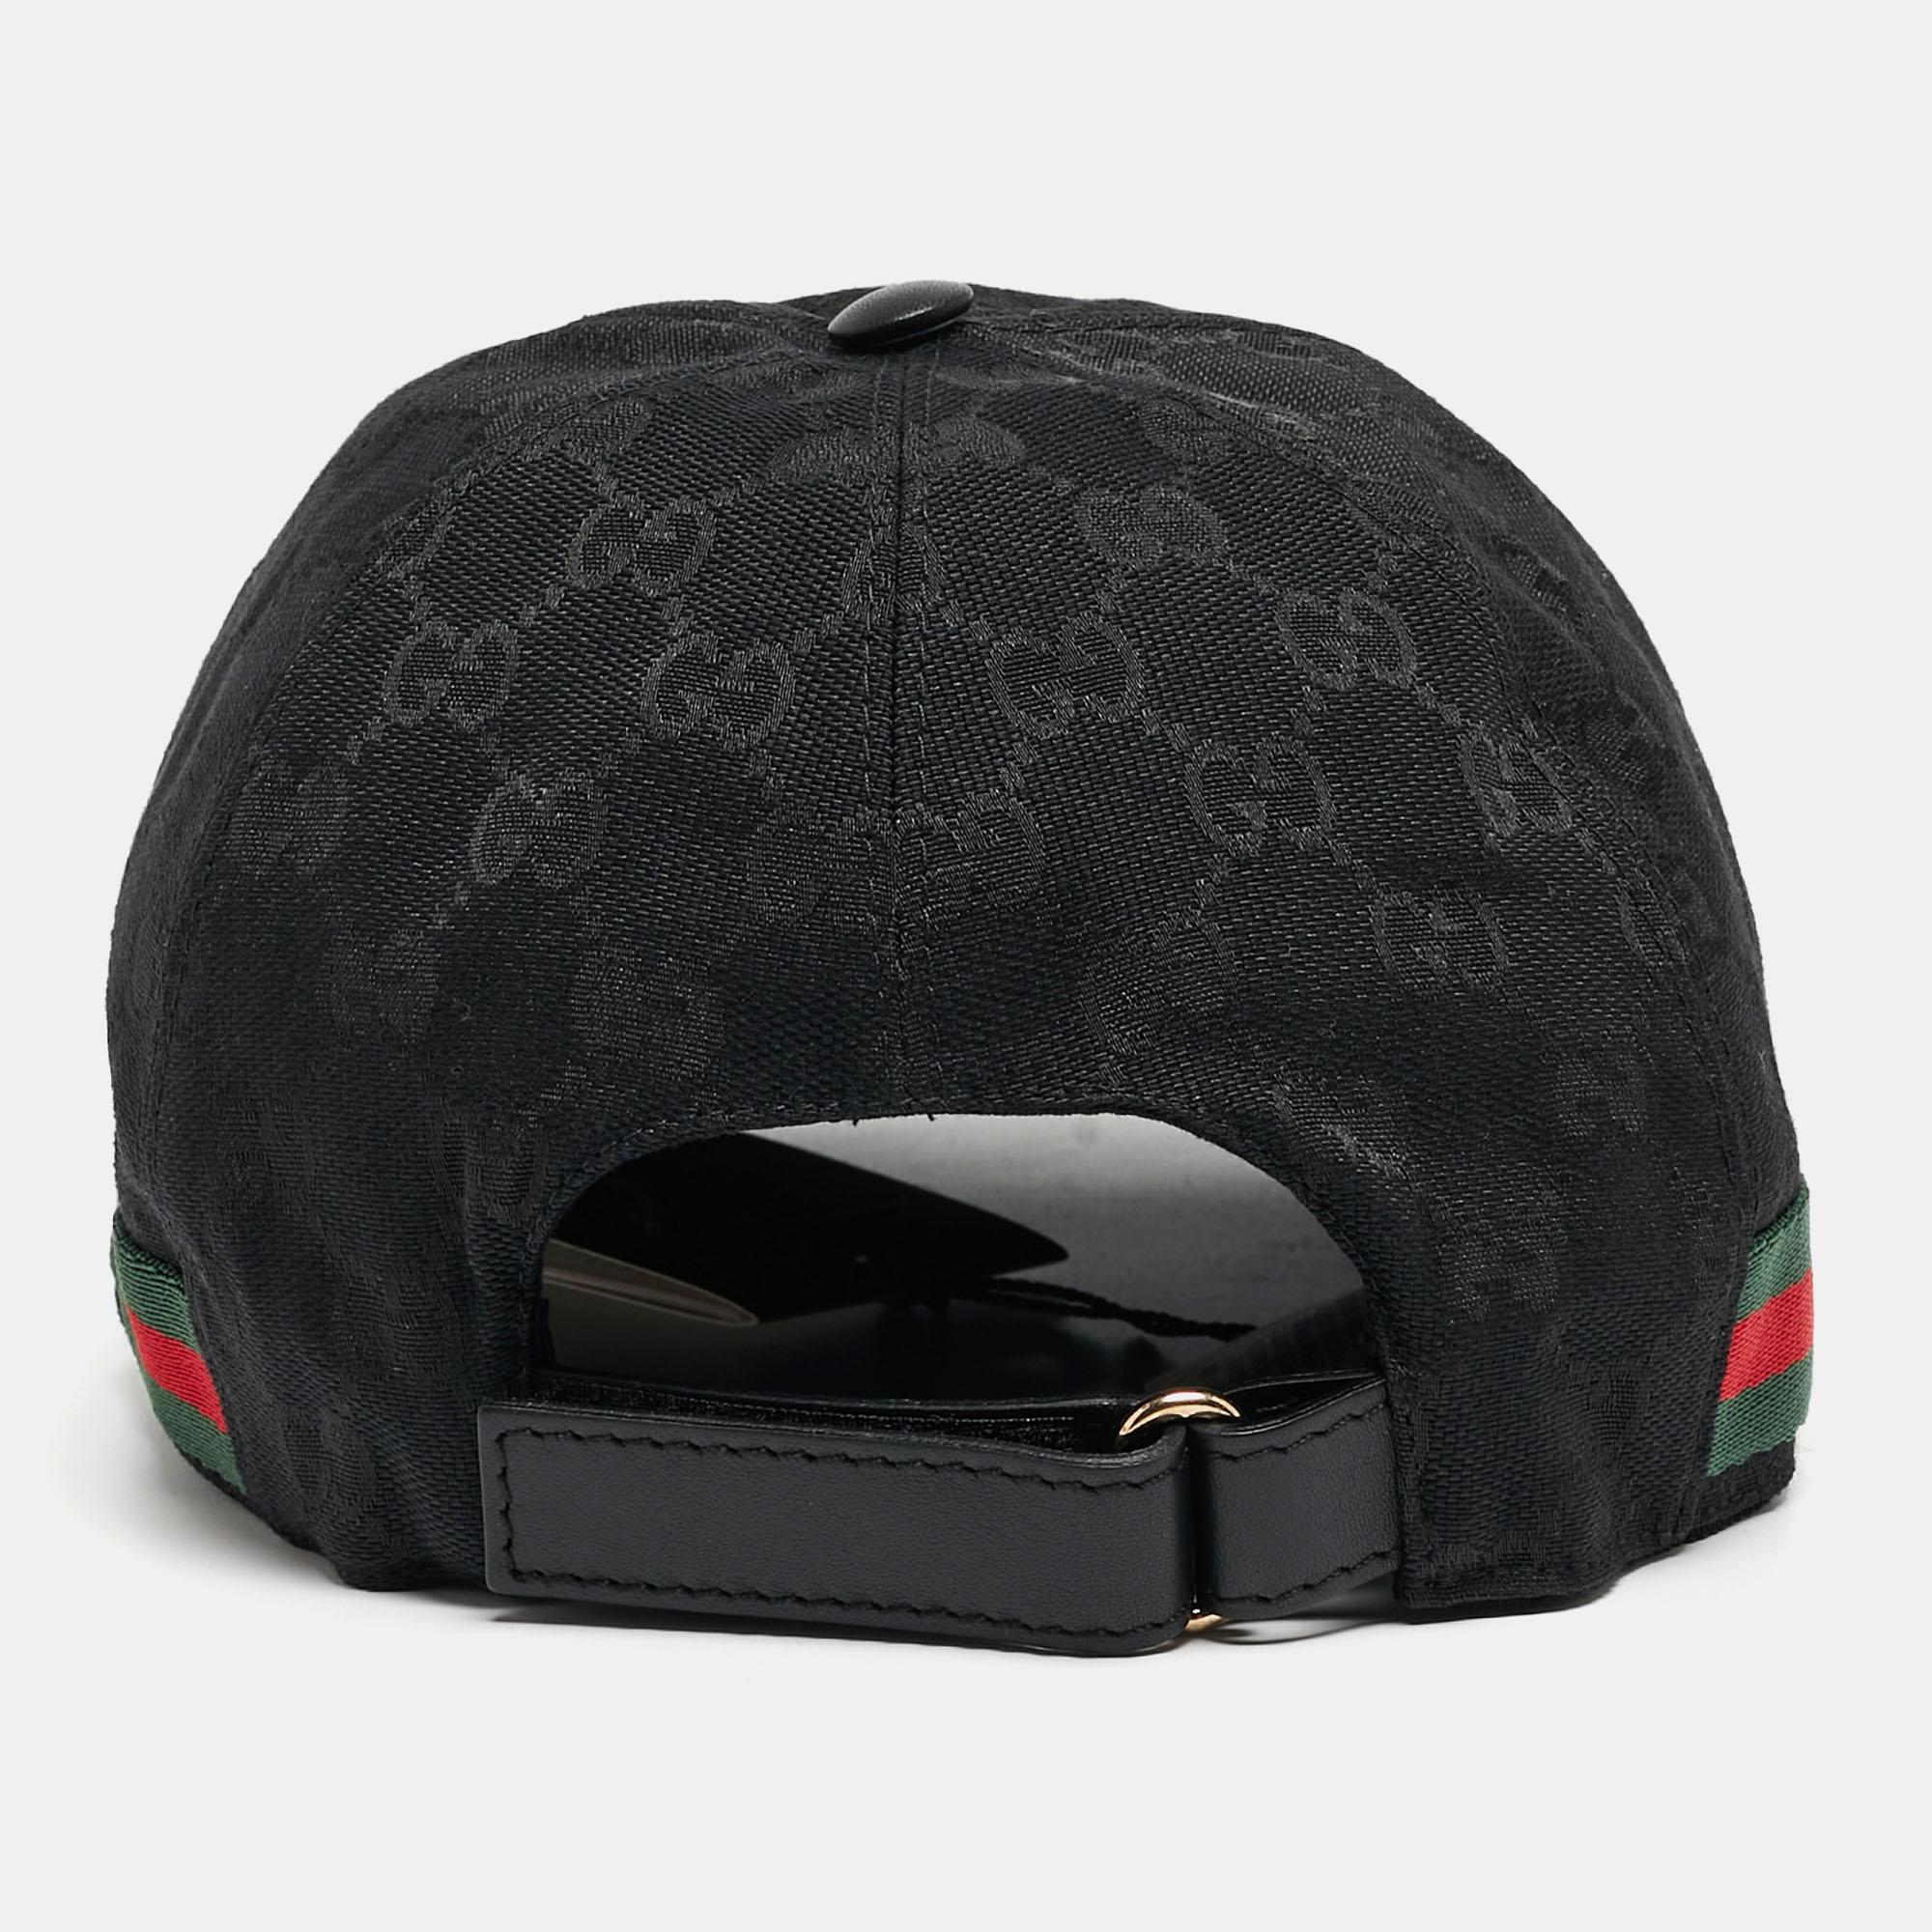 Baseball caps are perfect for sunny days, game days, or just to complete a casual outfit. Made in Italy, this Gucci piece is made from GG canvas and has the iconic Web trim.


Includes: Original Dustbag, Price Tag